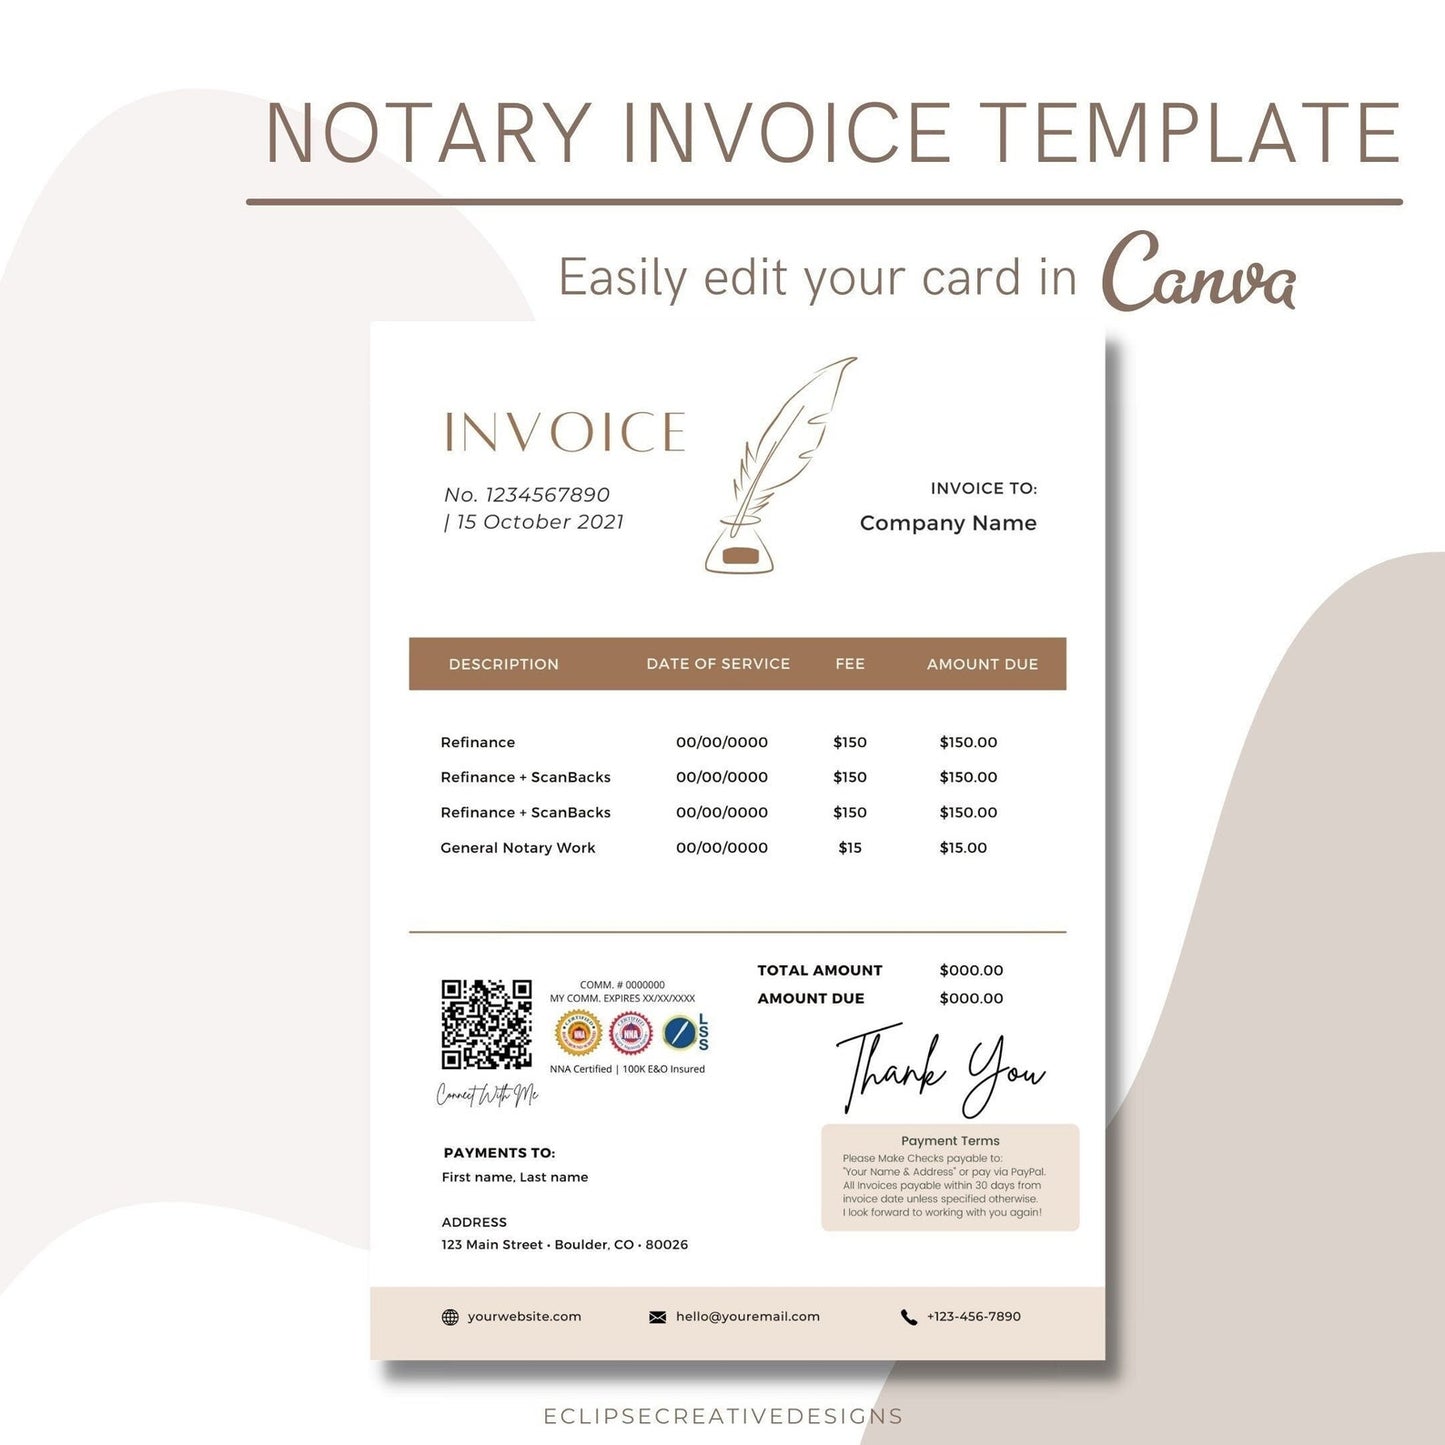 Notary Invoice Template | Invoice for Notary Public | Loan Signing Agent Invoice | Loan Signing Agent Supplies